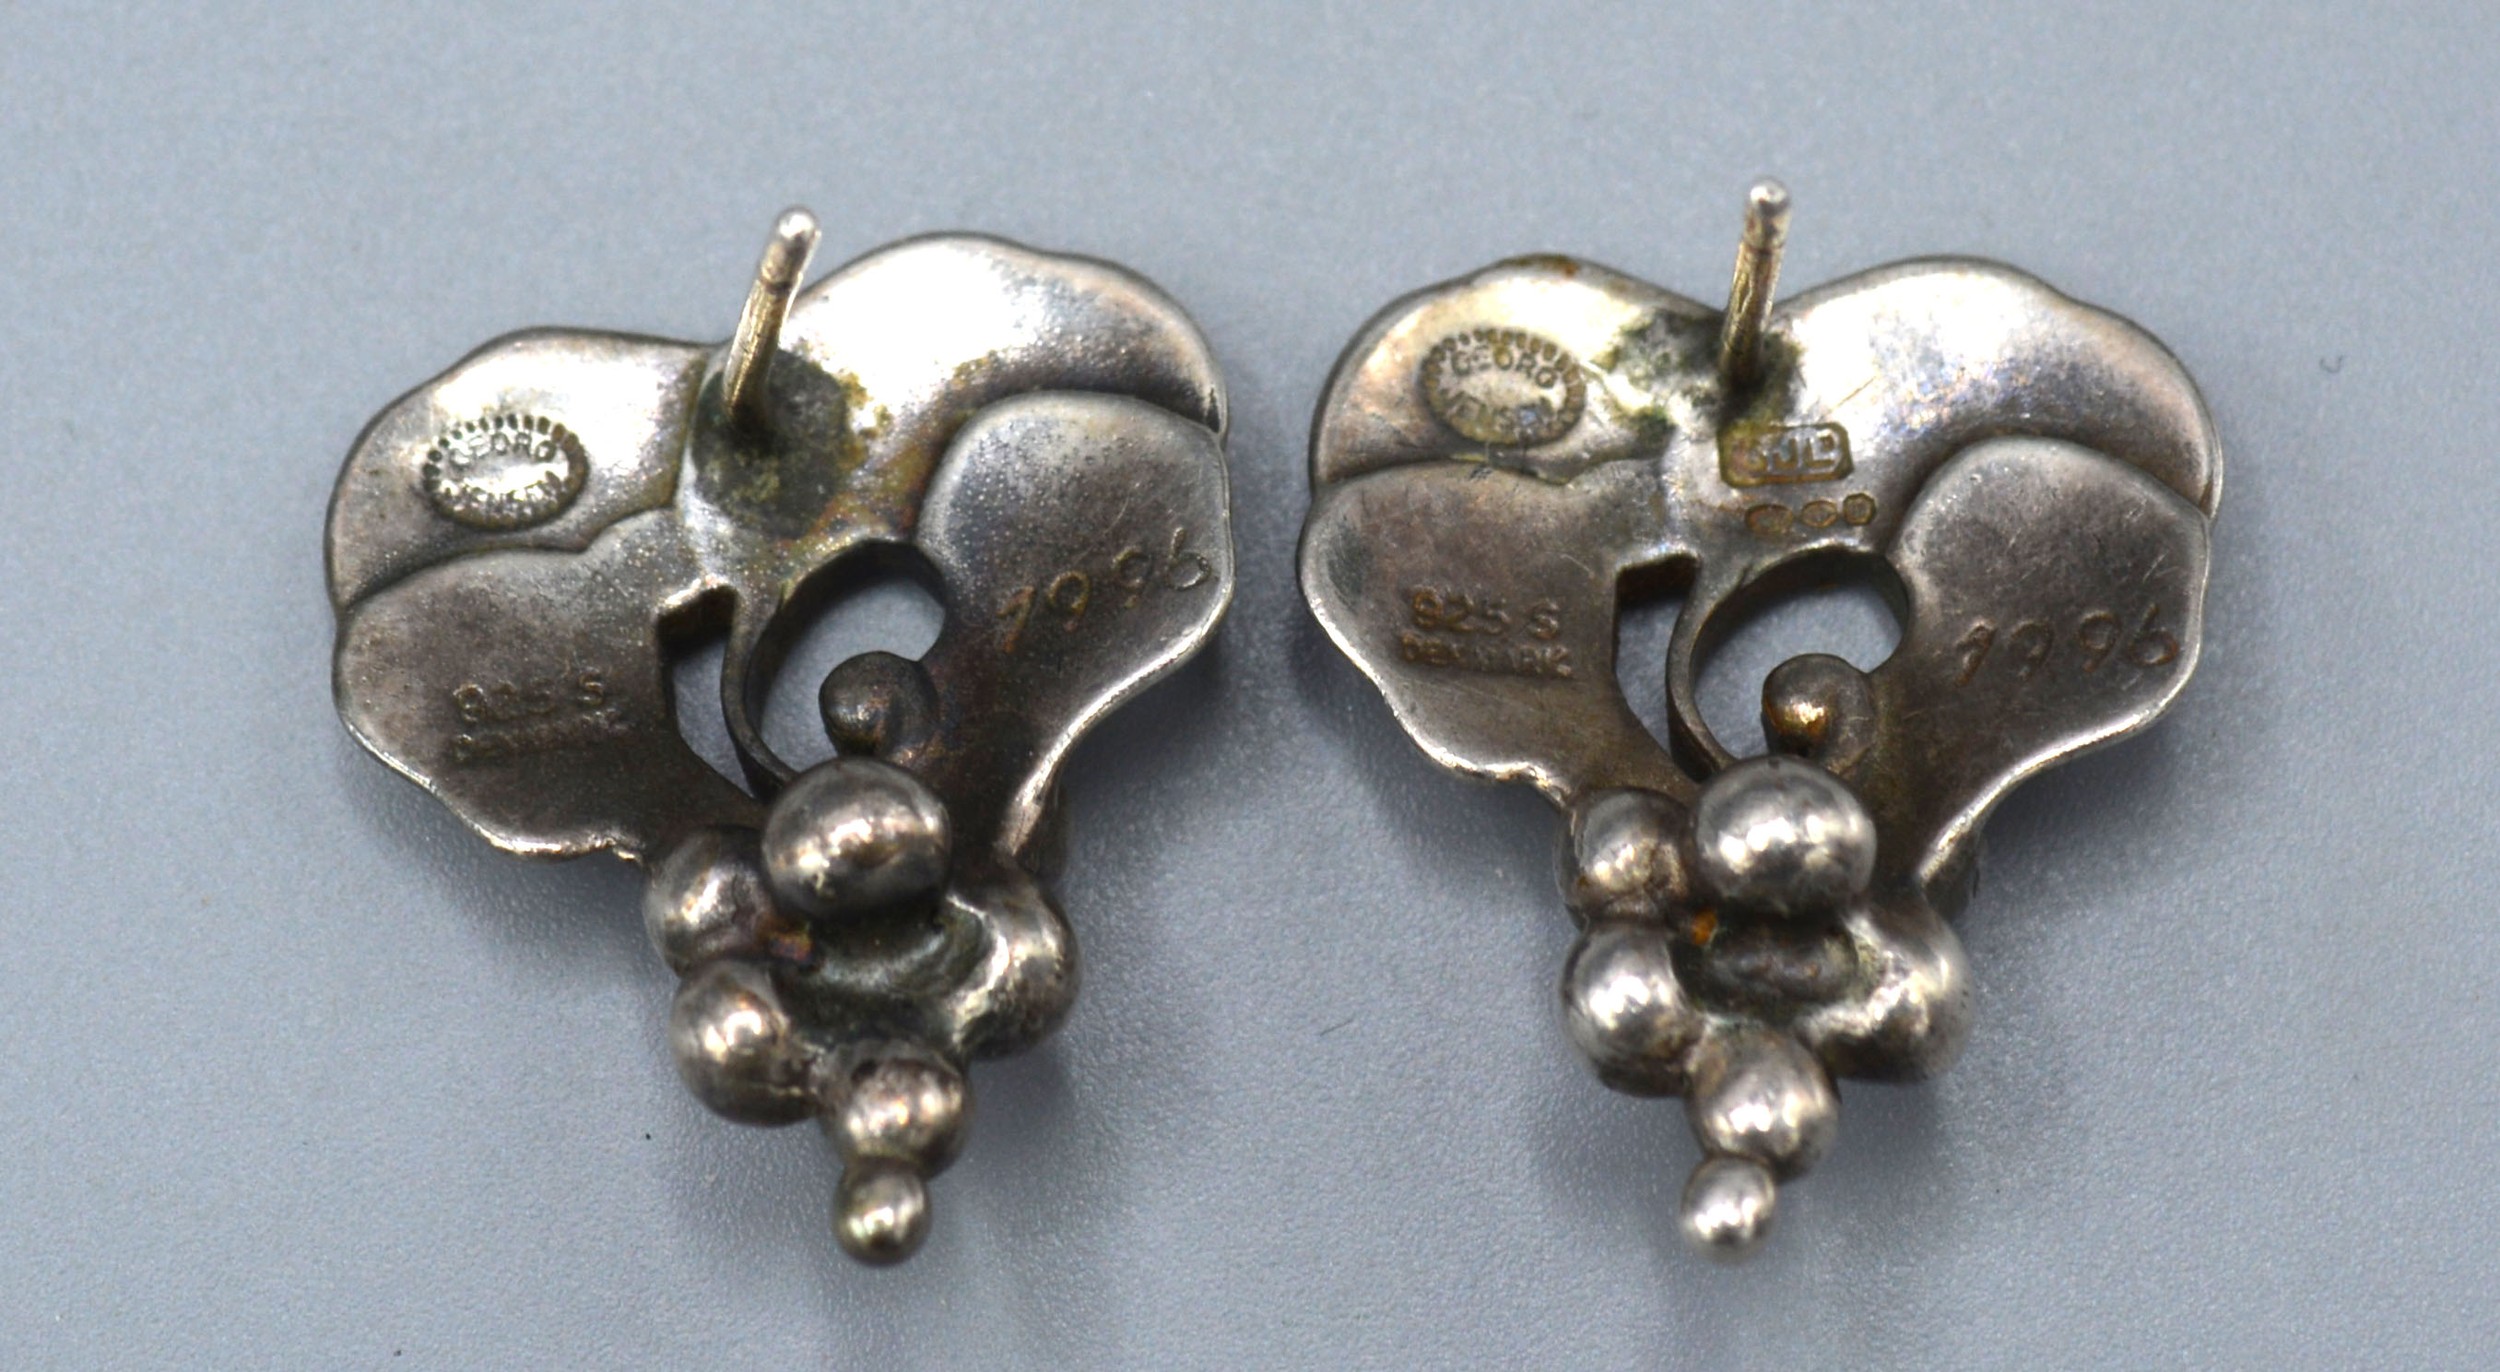 A Pair of 925 Silver Earrings by Georg Jensen in the form of Grapevine, 2.5 cms long - Image 2 of 2